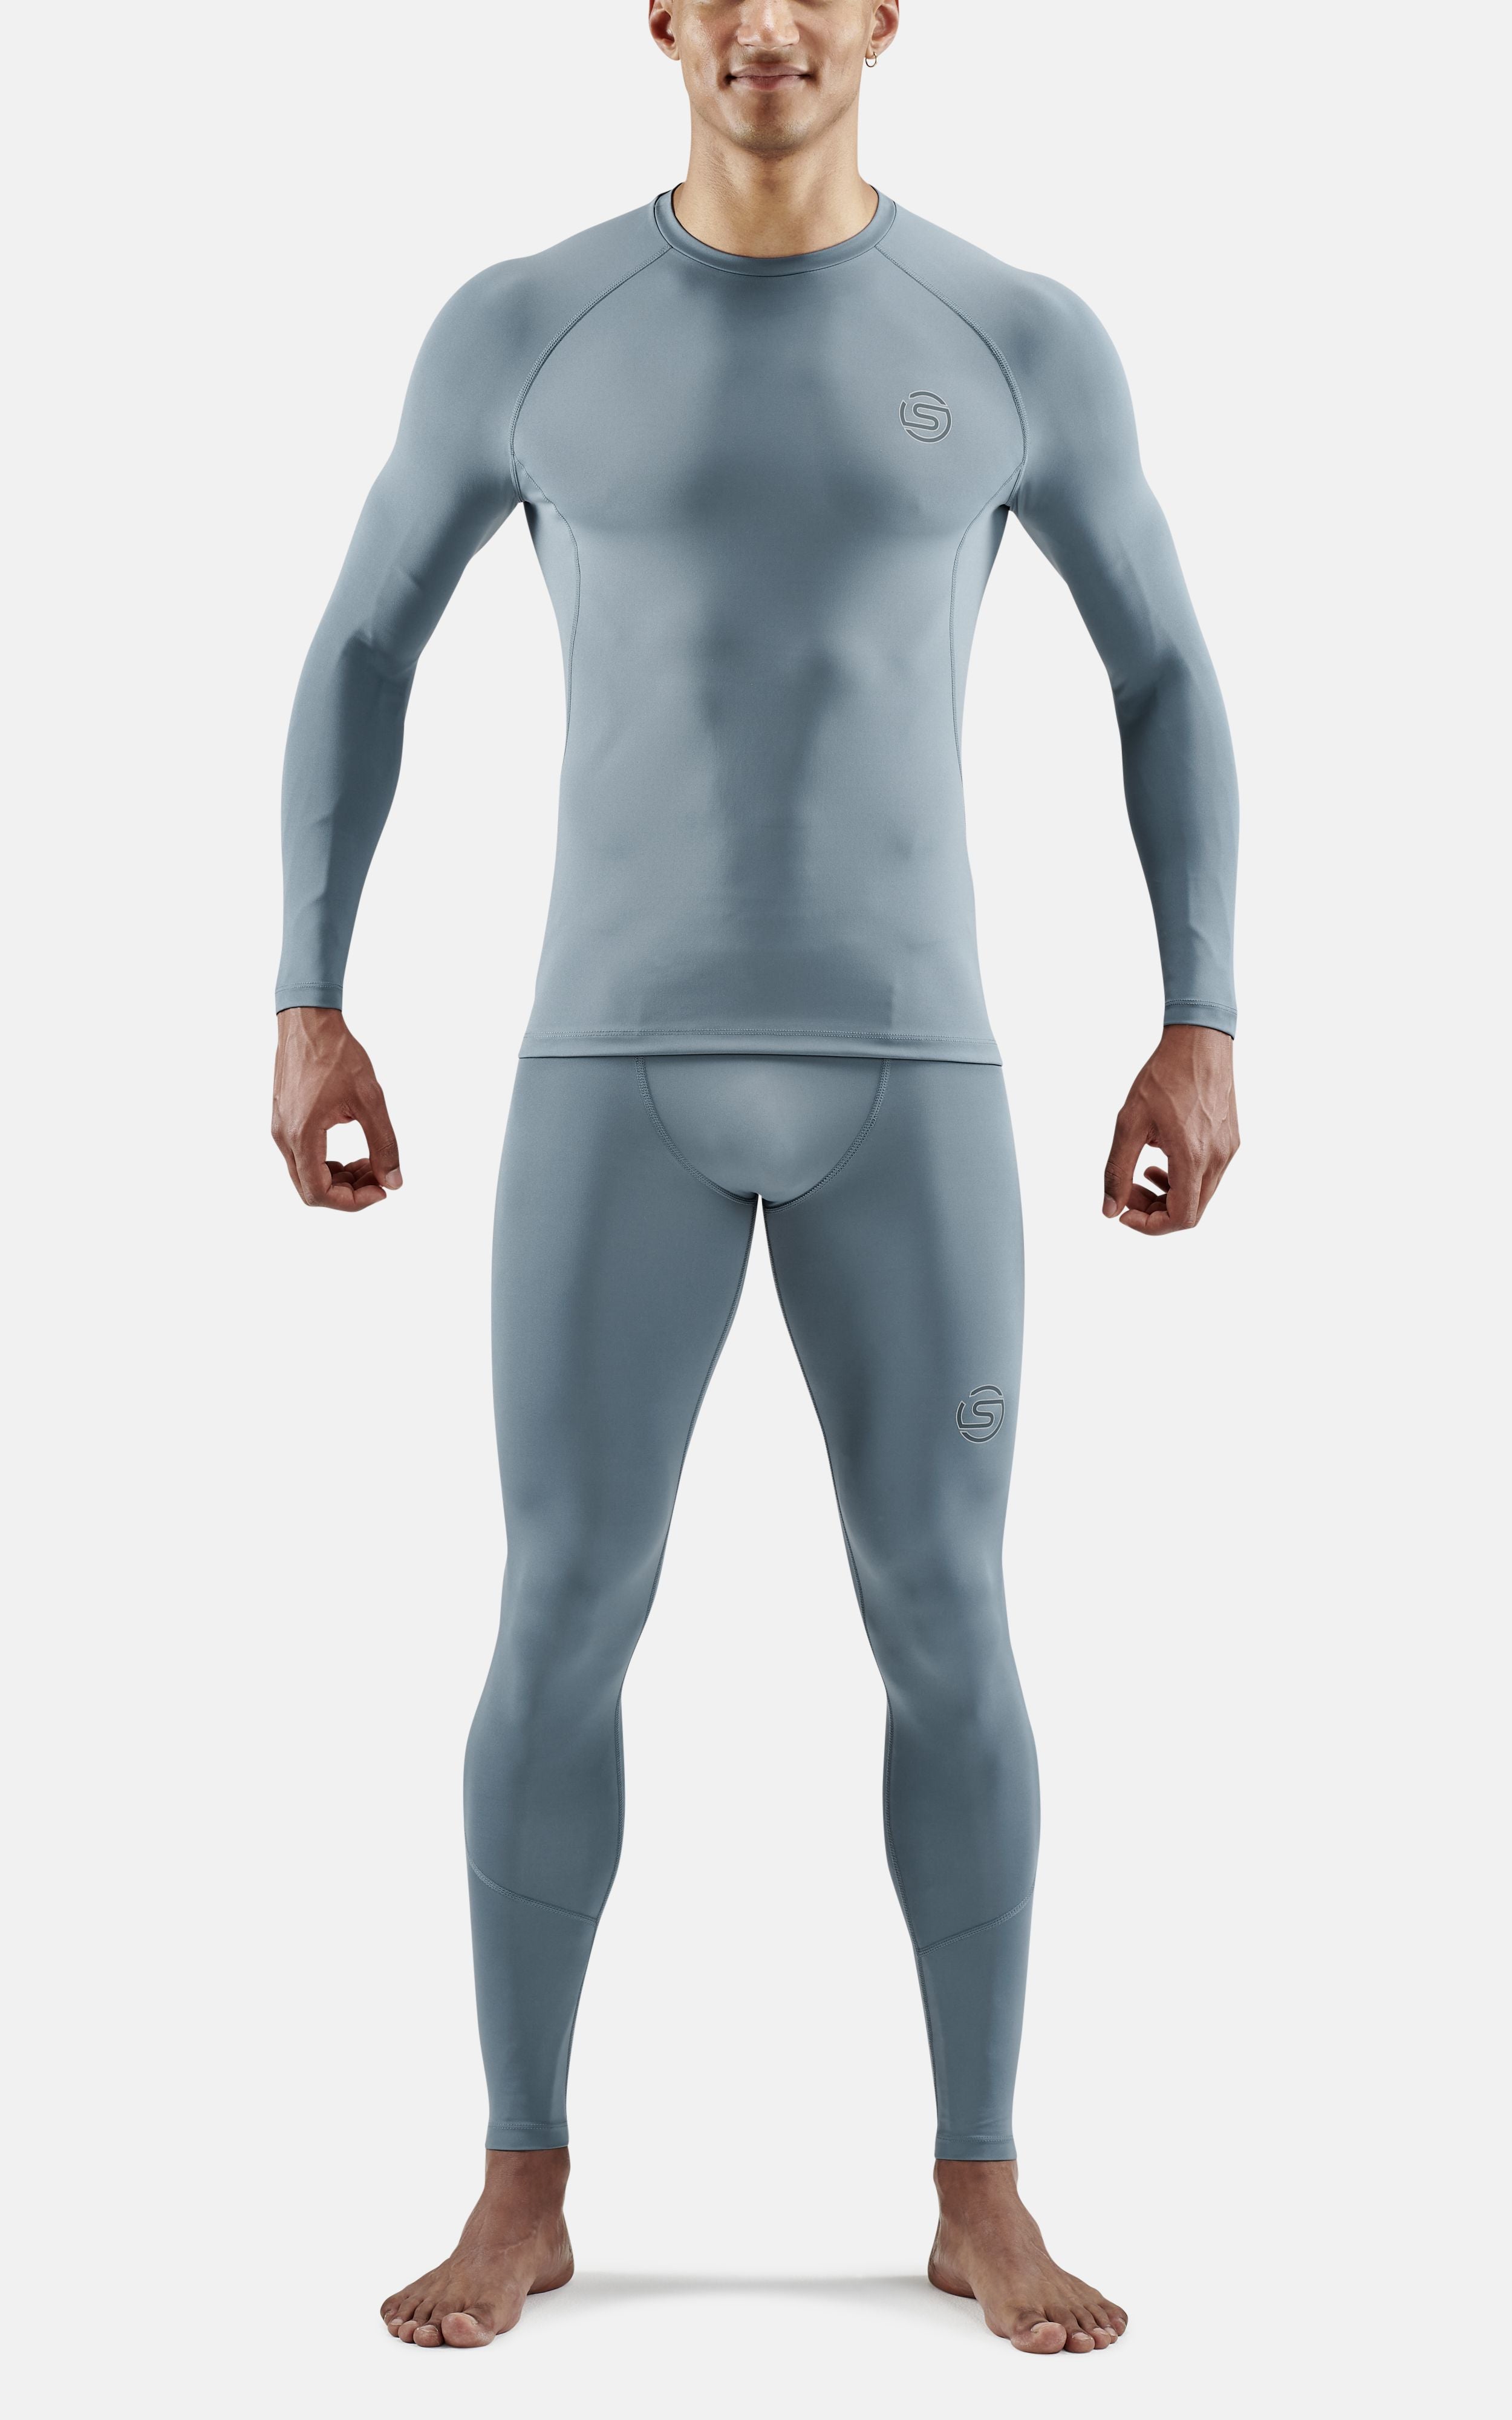 Men Sports Skins Compression Wear - China Activewear and